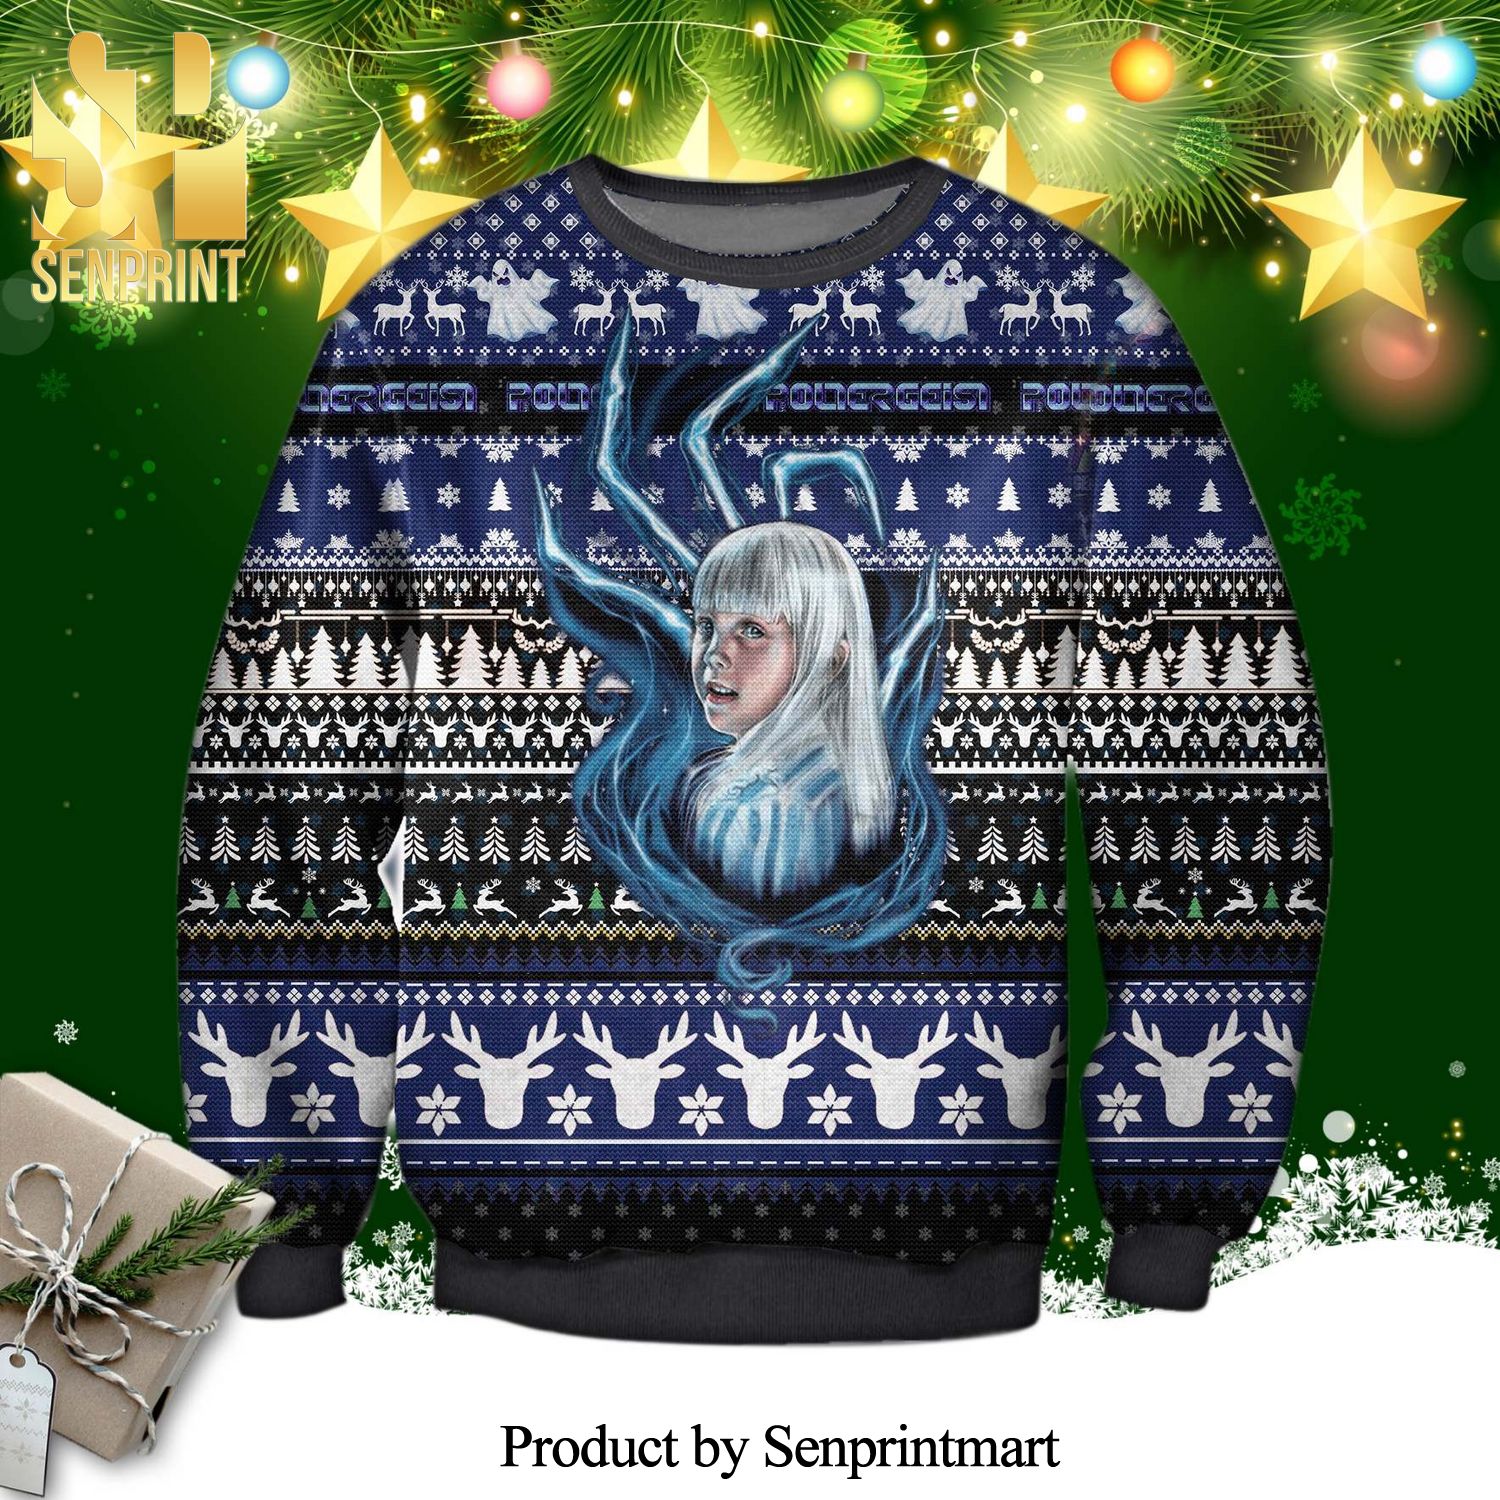 Carol Anne Freeling Poltergeist Poster Knitted Ugly Christmas Sweater